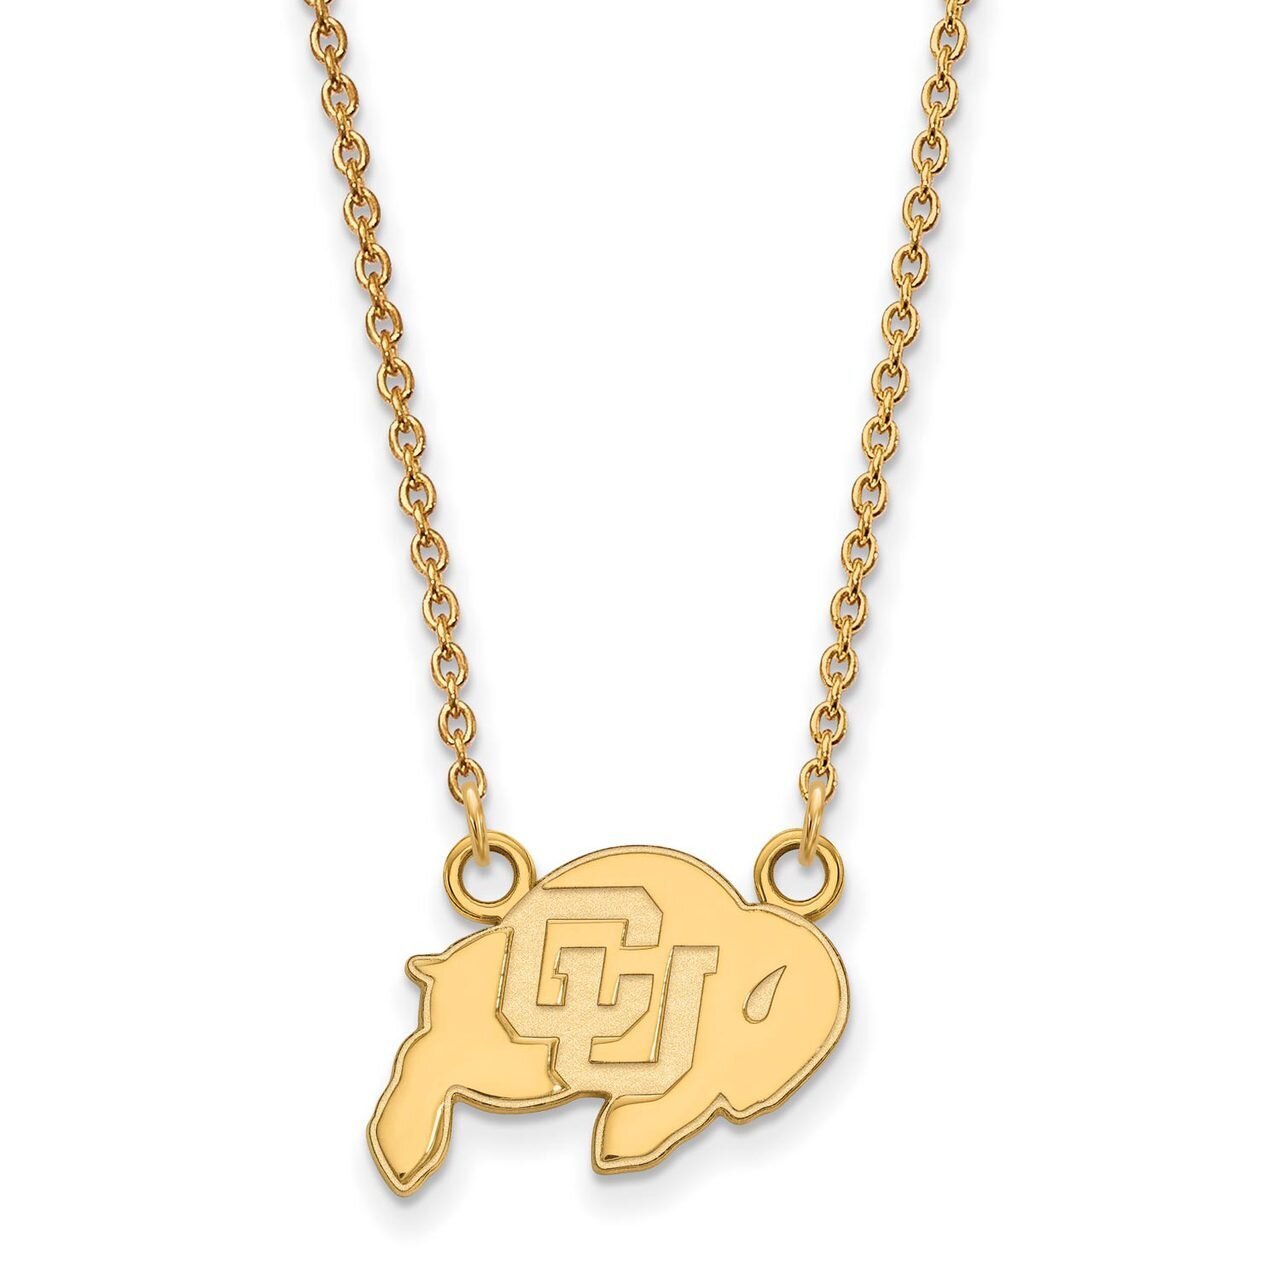 University of Colorado Small Pendant with Chain Necklace 14k Yellow Gold 4Y011UCO-18